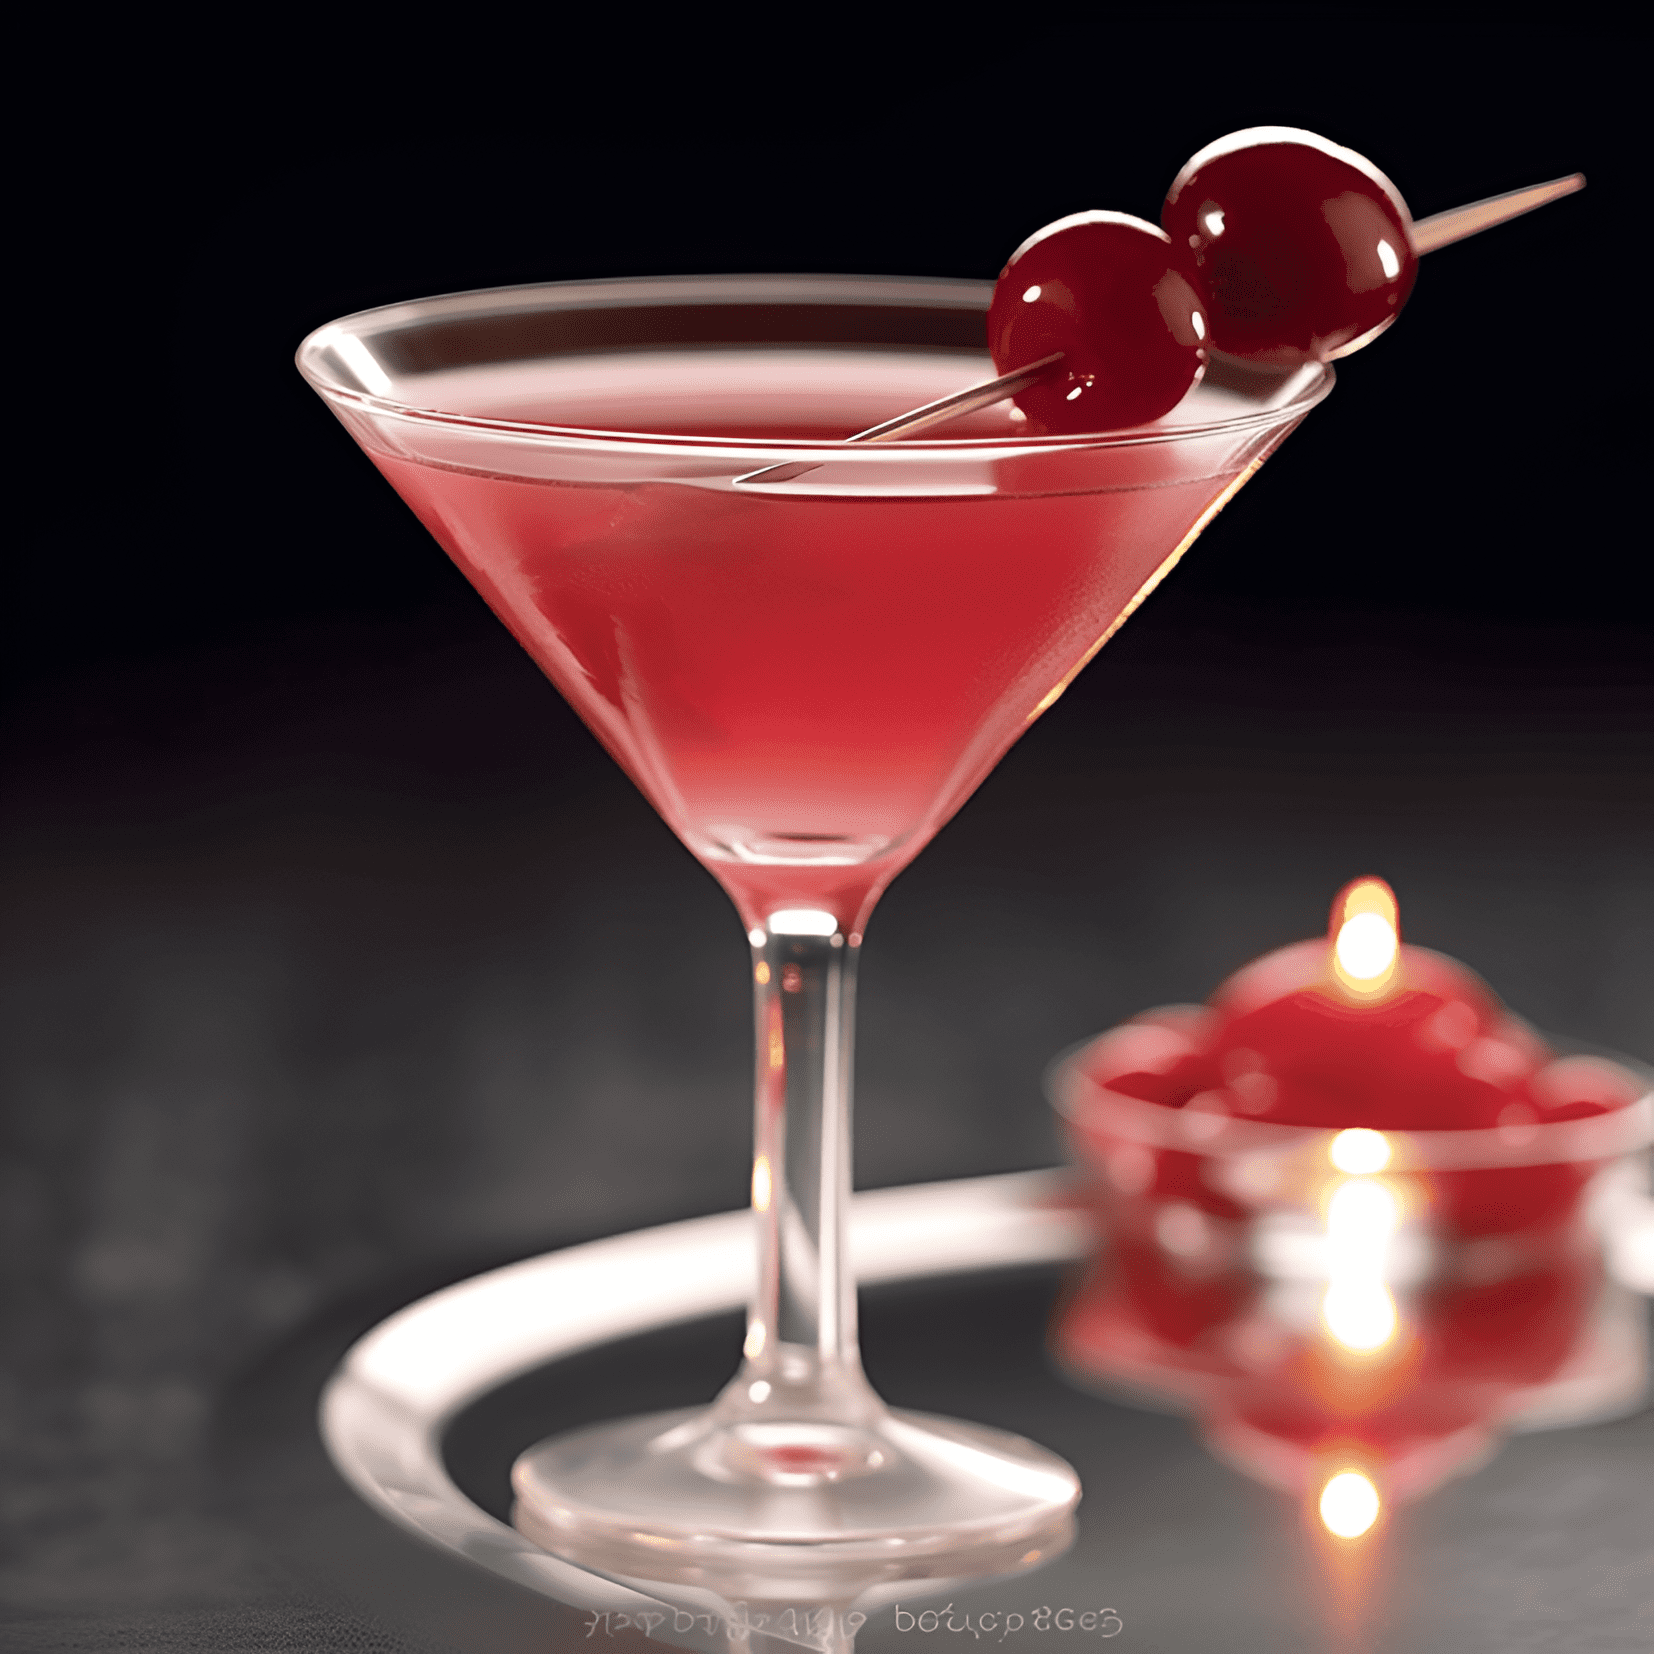 Love Bite Cocktail Recipe - The Love Bite cocktail is a deliciously sweet and fruity drink, with a hint of tartness from the cranberry juice. The combination of orange liqueur and cherry liqueur gives it a rich, velvety taste, while the cream adds a smooth and creamy texture. The overall flavor is well-balanced, making it a delightful and refreshing cocktail.